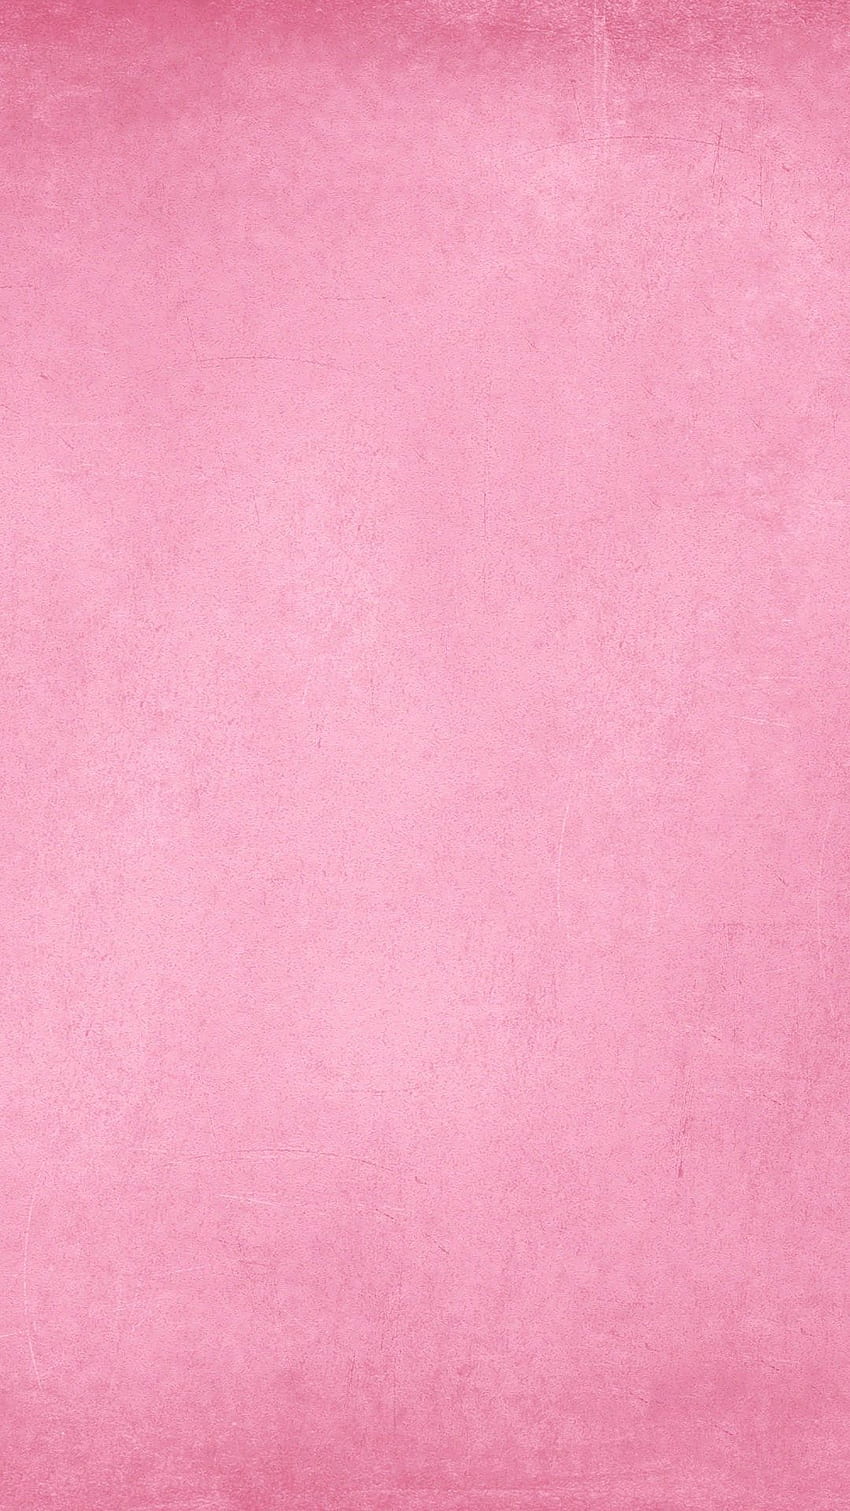 Texture Mobile Pink Abstract - Cool Pink Background iPhone, Cool Pink Abstract fondo de pantalla del teléfono